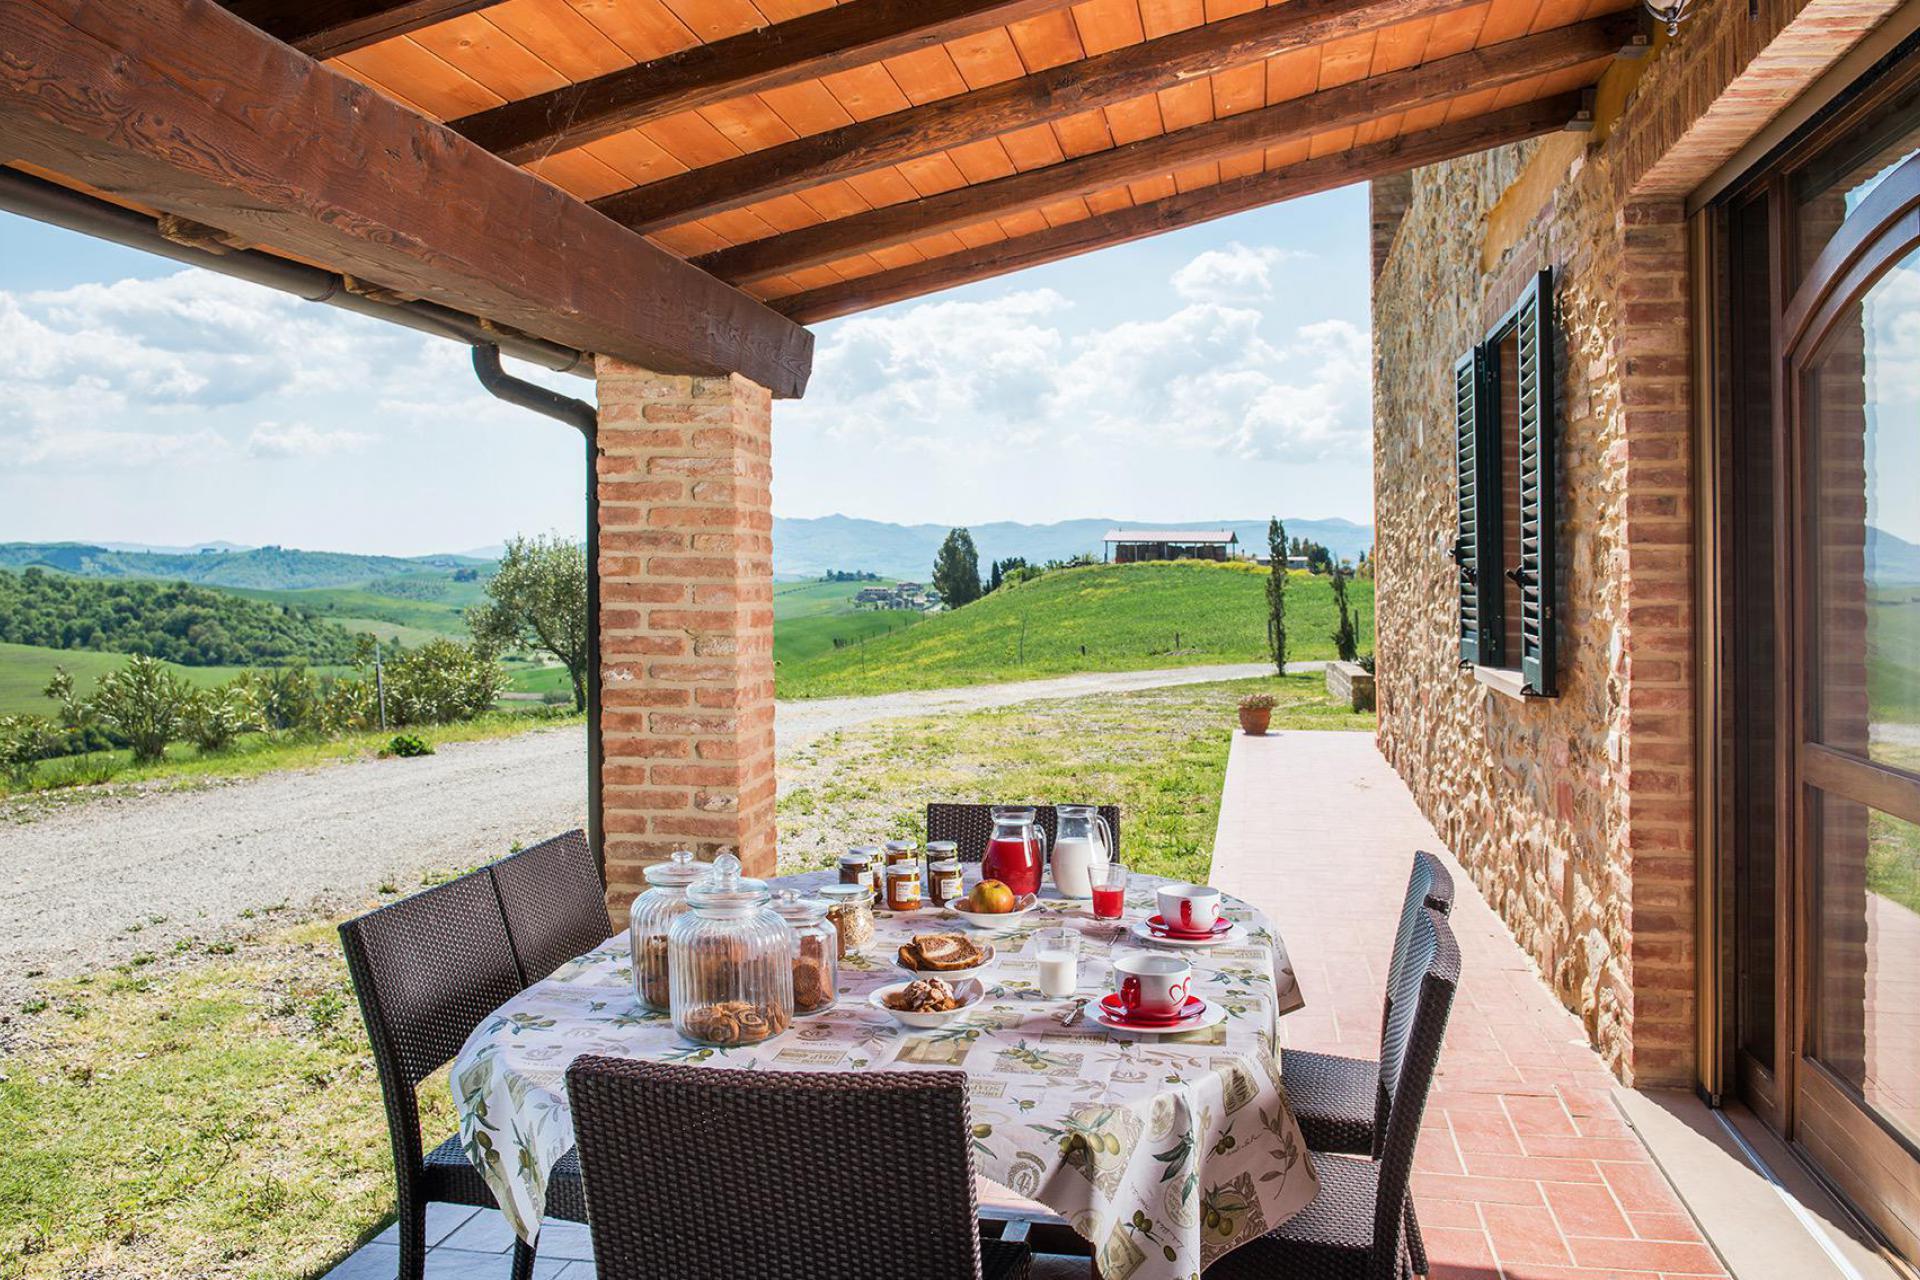 Child-friendly agriturismo with shared dinners